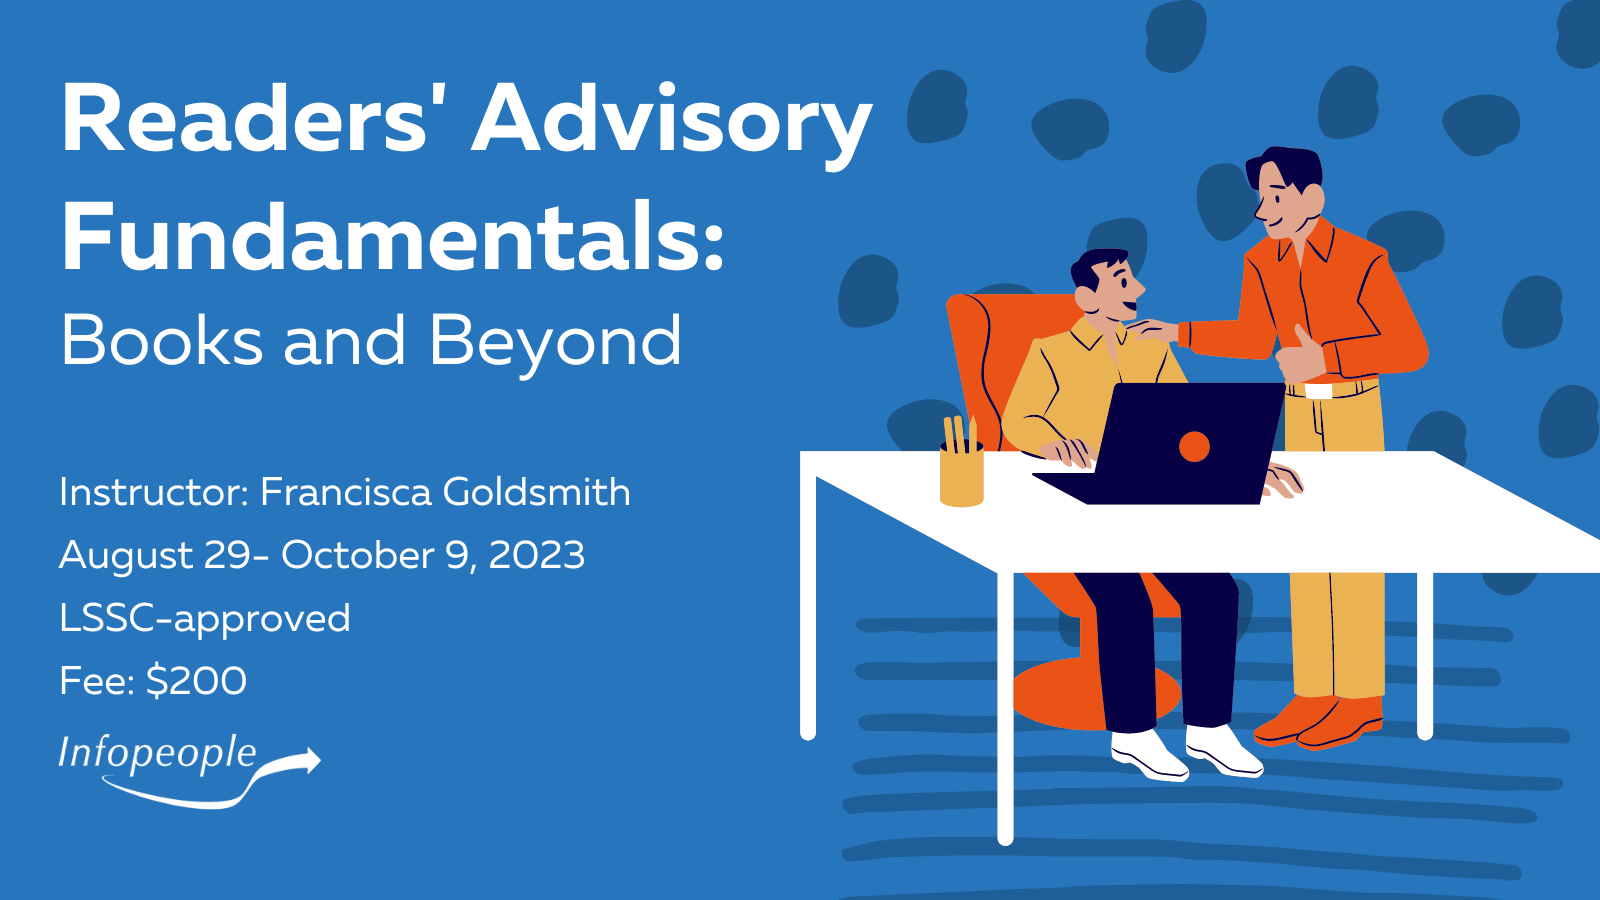 Readers' Advisory Fundamentals: Books and Beyond - an Infopeople course. Instructor: Francisca Goldsmith. August 29 to October 9, 2023. LSSC-approved. Fee: $200. A man working at a computer while another gives him advice and speaks to him.